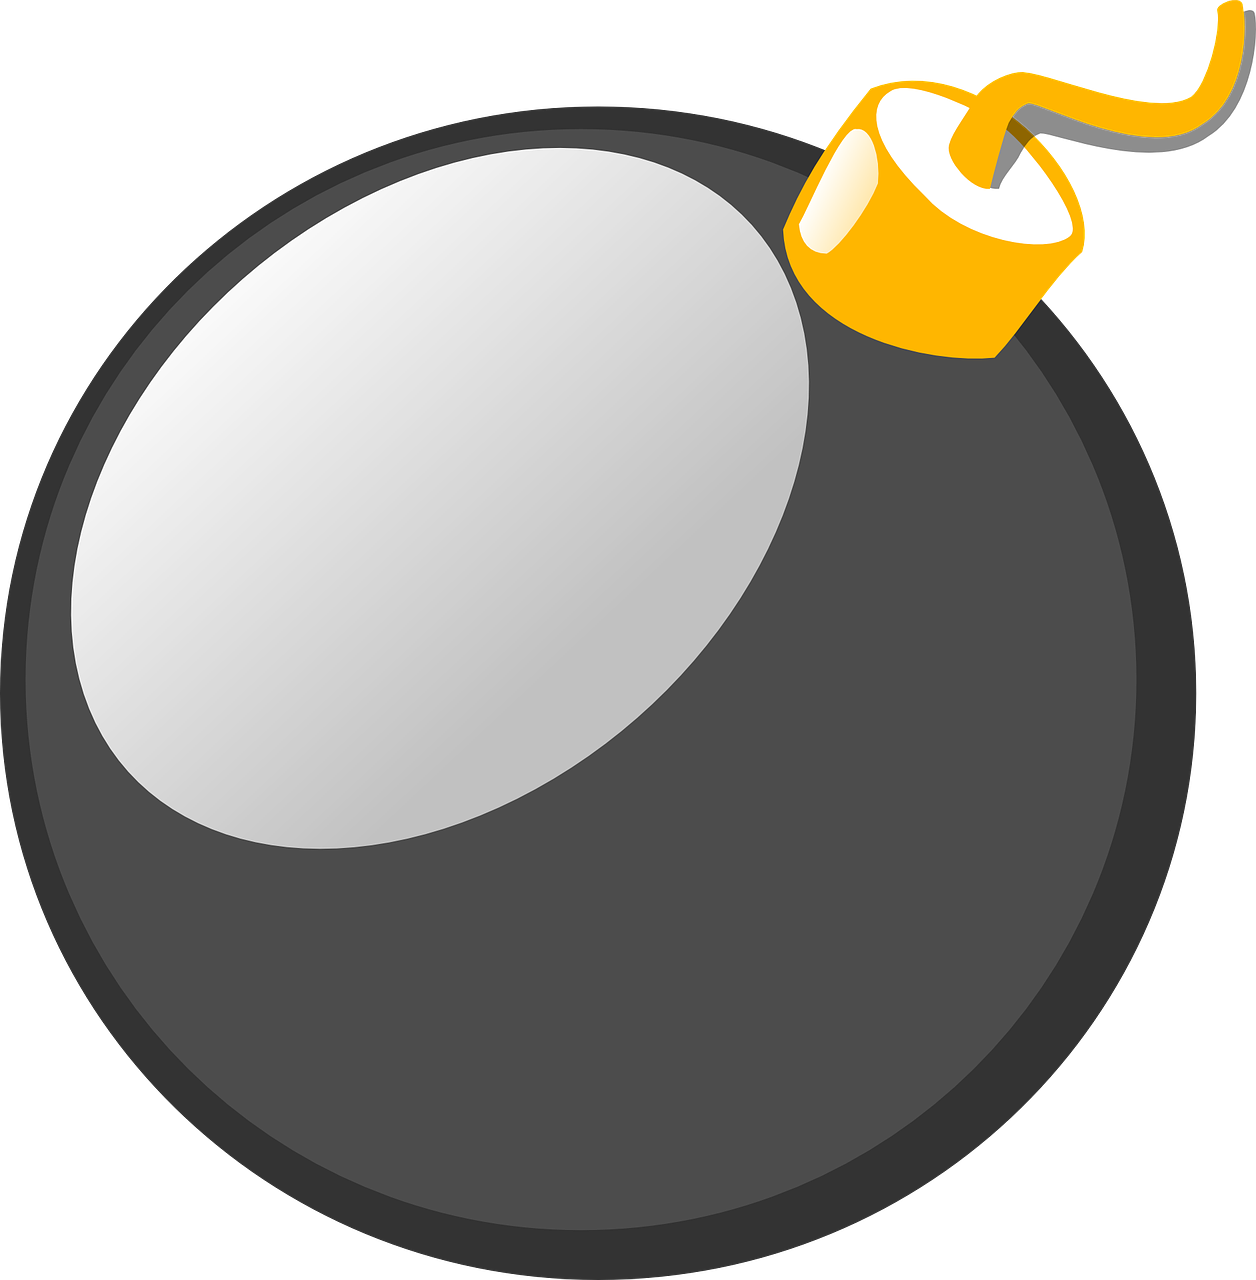 a black bomb with a yellow top, inspired by Shūbun Tenshō, pixabay, scrolling computer mouse, silver white and gold, flat grey color, spherical